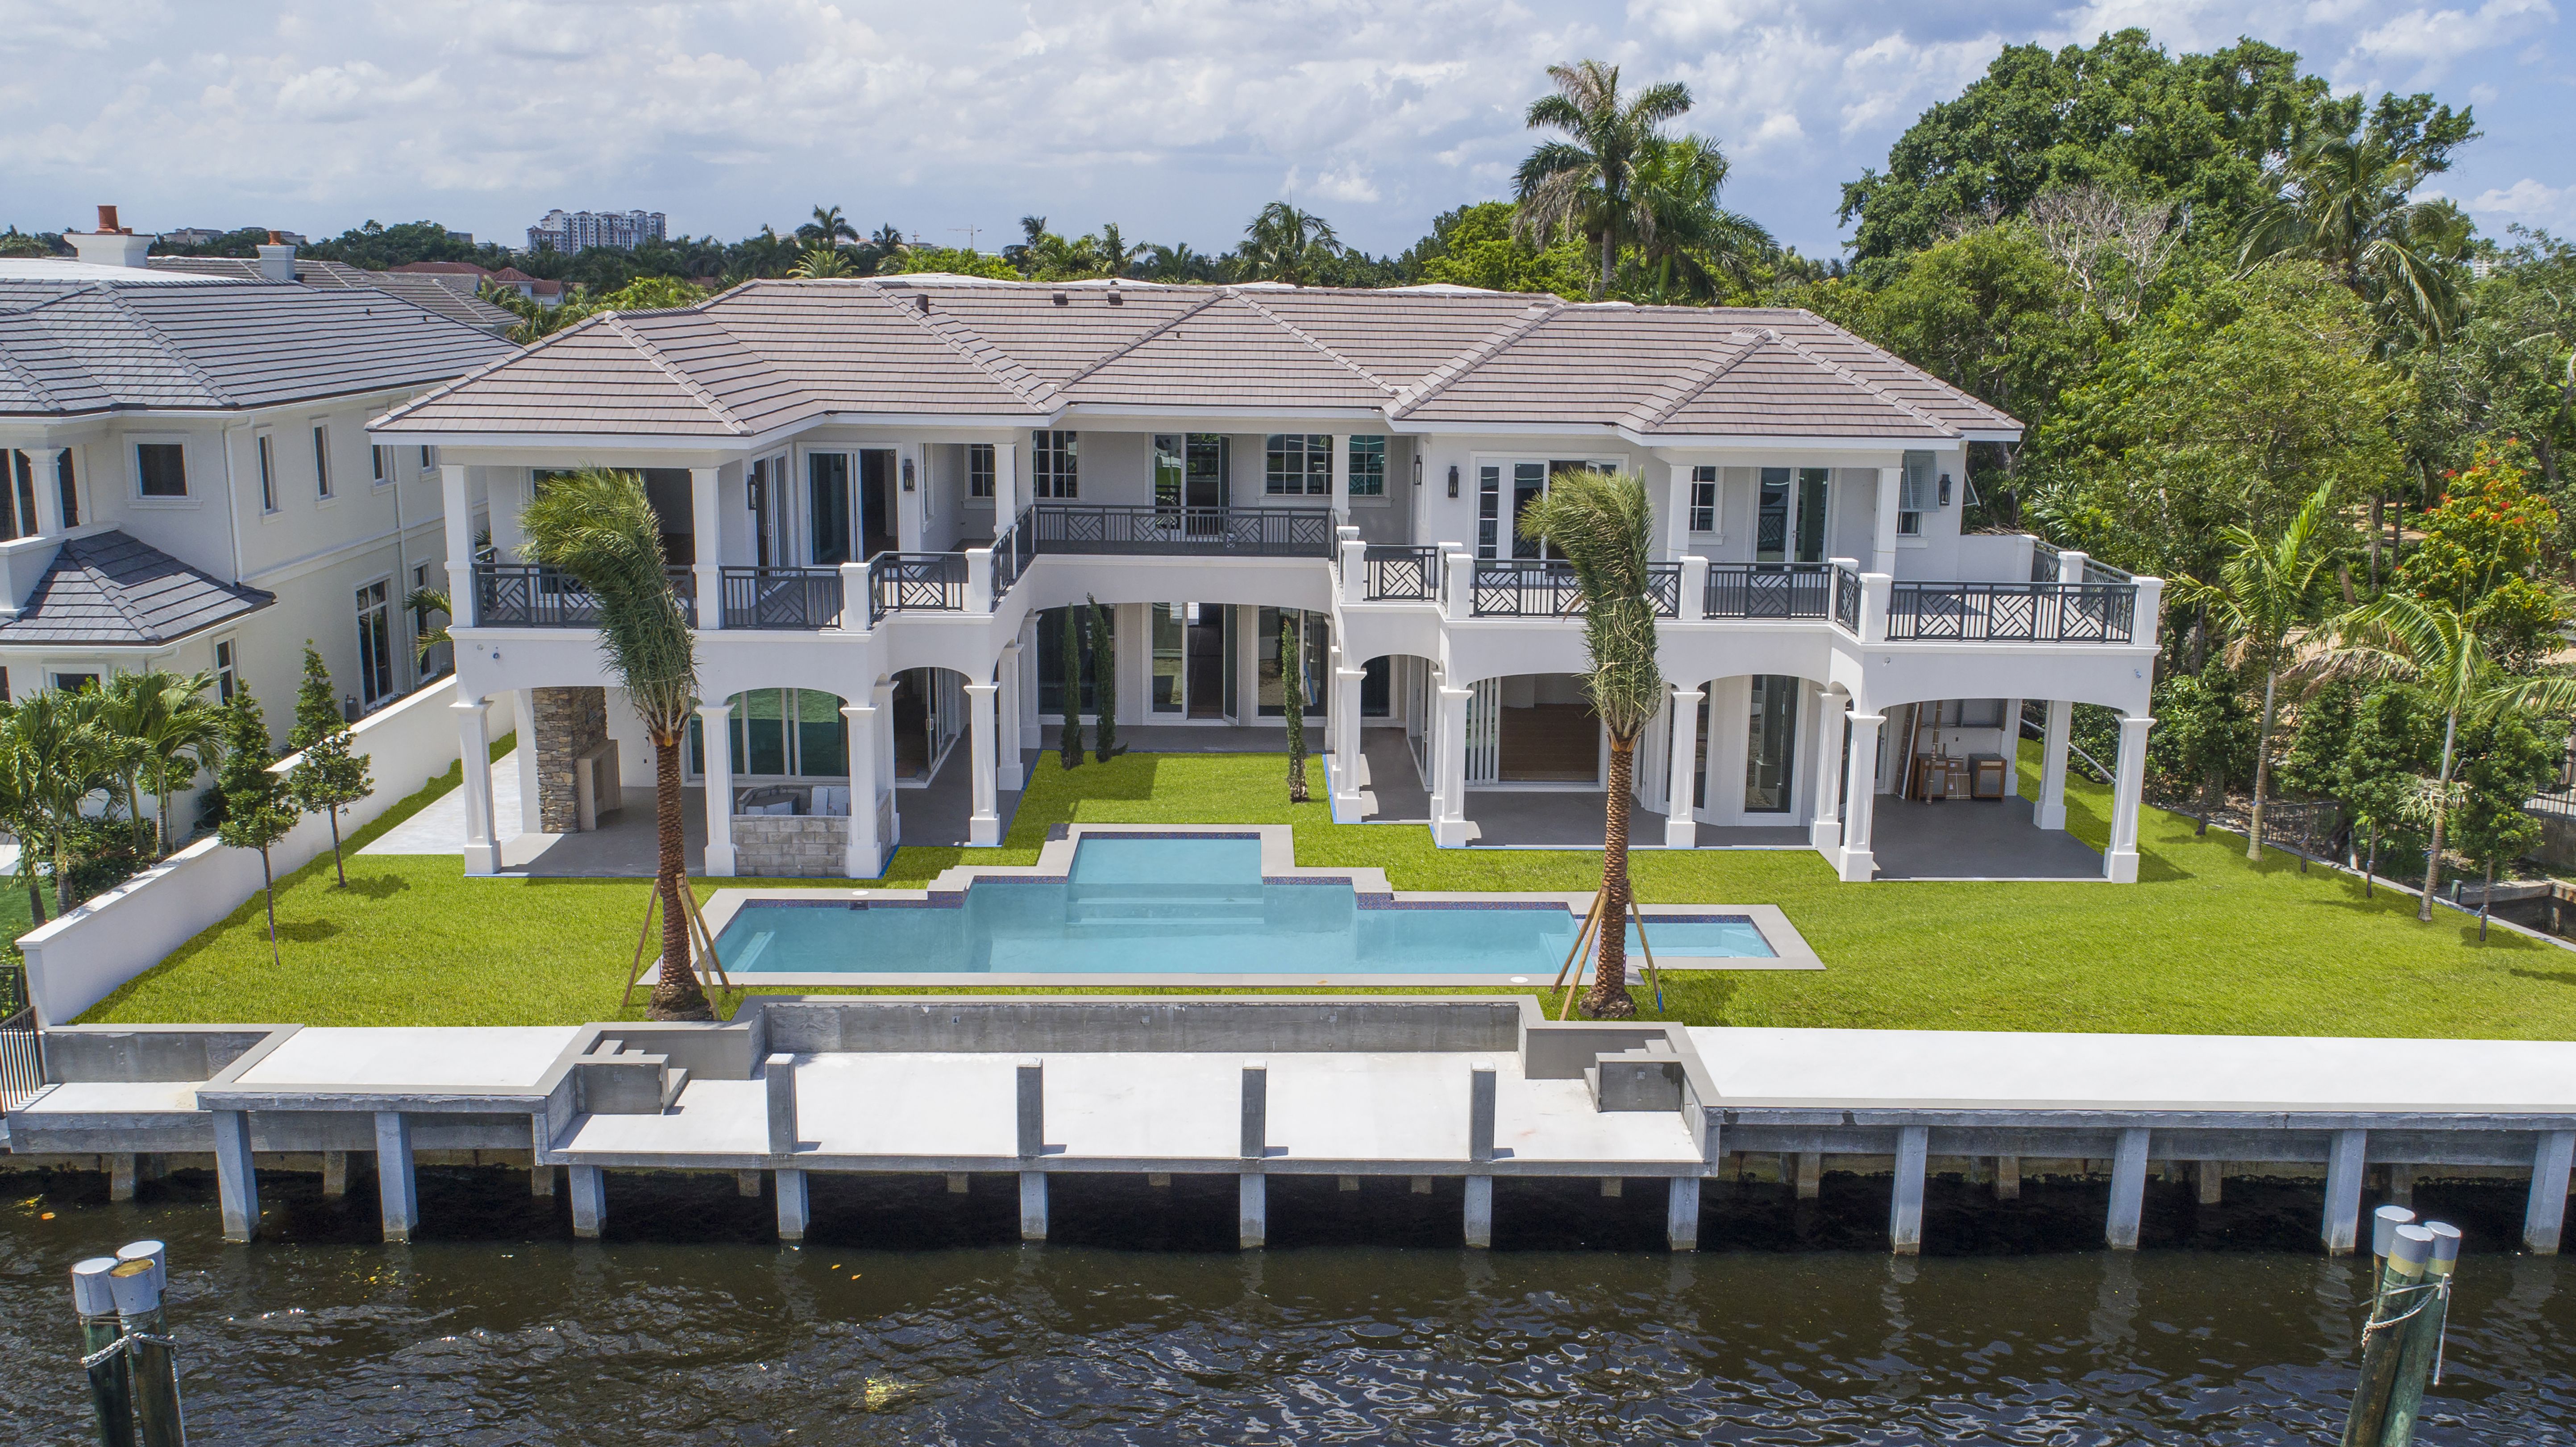 484 S Maya Palm Drive: a luxury home for sale in Boca Raton, Palm ...